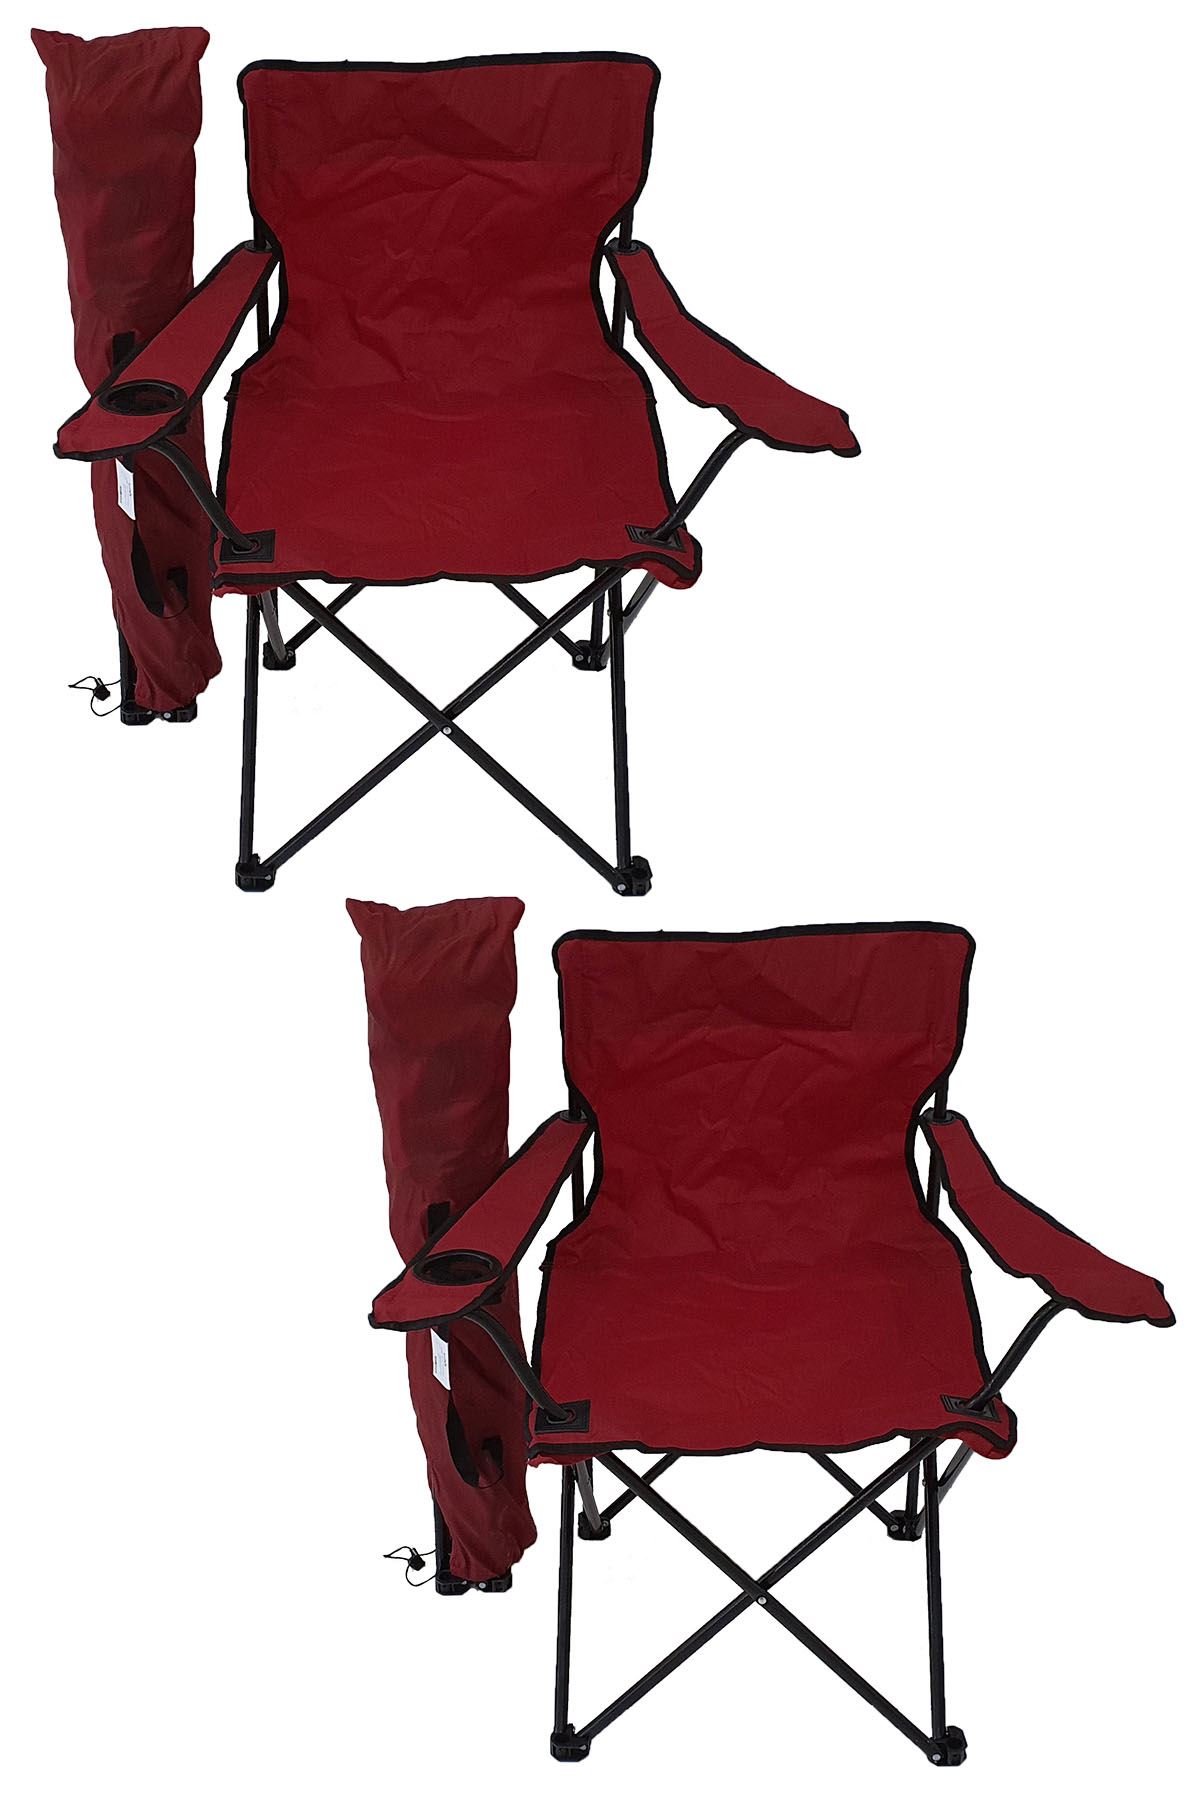 Bofigo 2 Pcs Camping Chair Picnic Chair Folding Chair Camping Chair with Carrying Bag Red